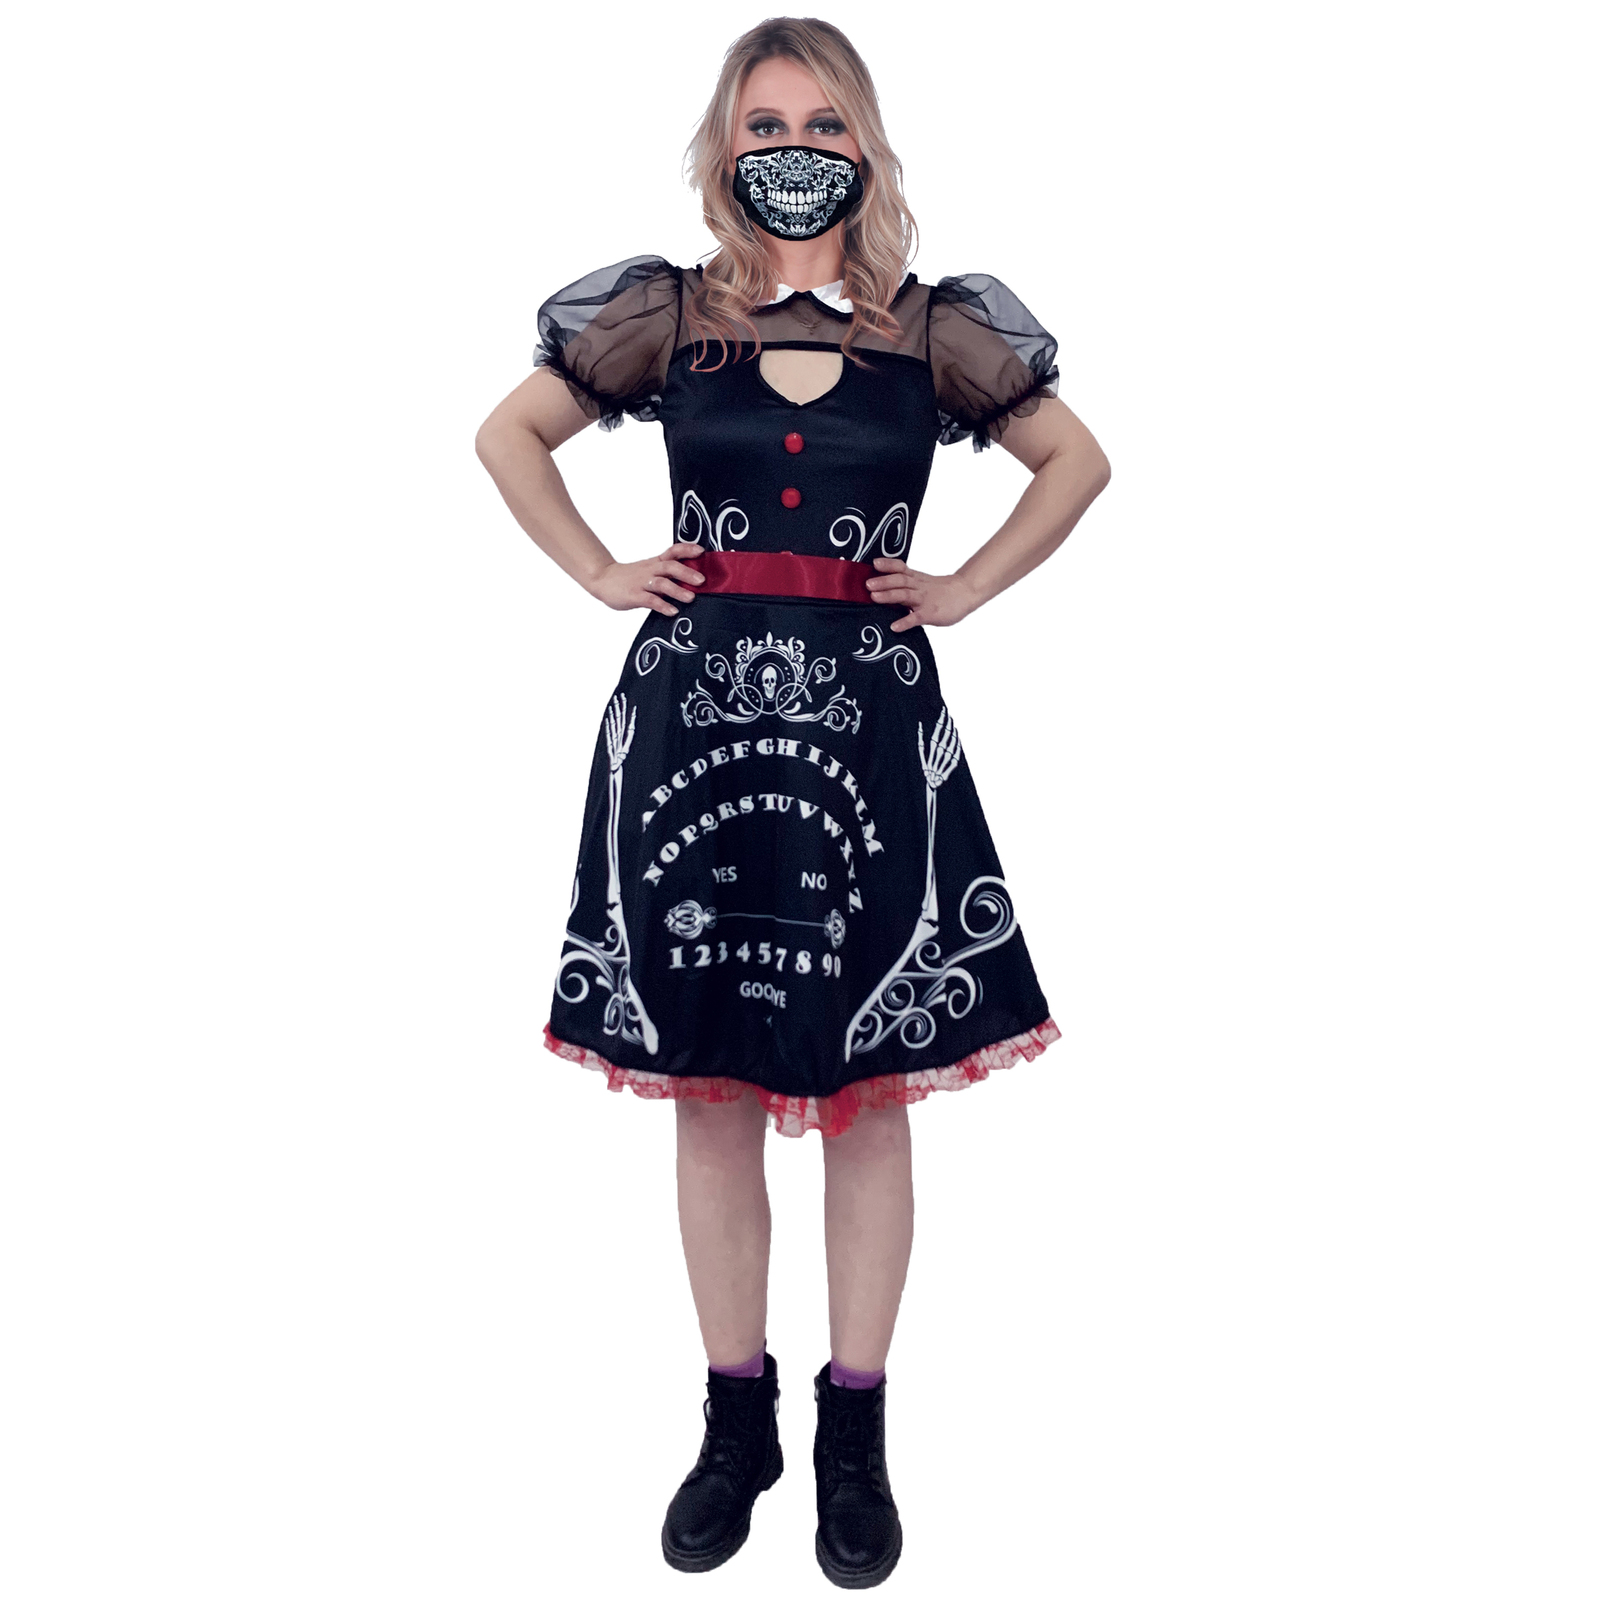 Ouija Board Costume - Gotcha Covered Party Supplies